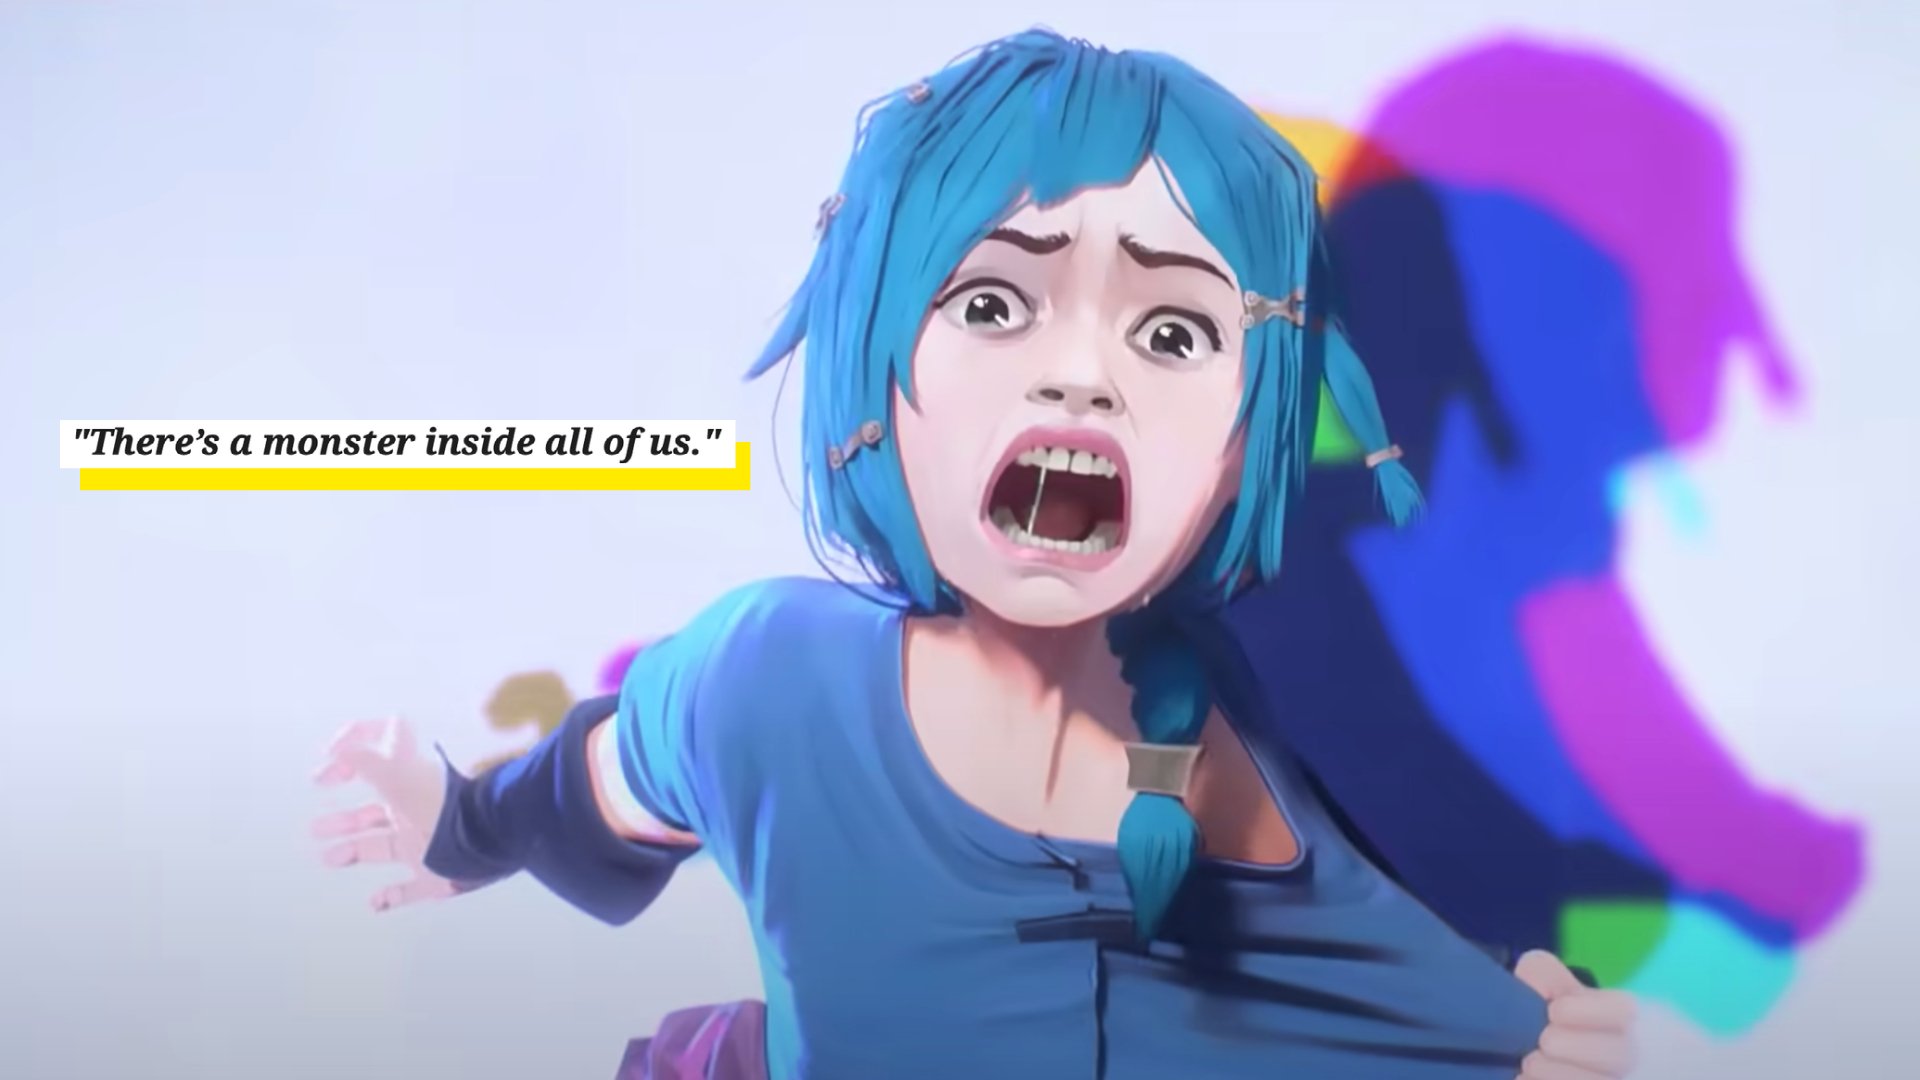 Arcane quotes: The most memorable lines from the LoL anime